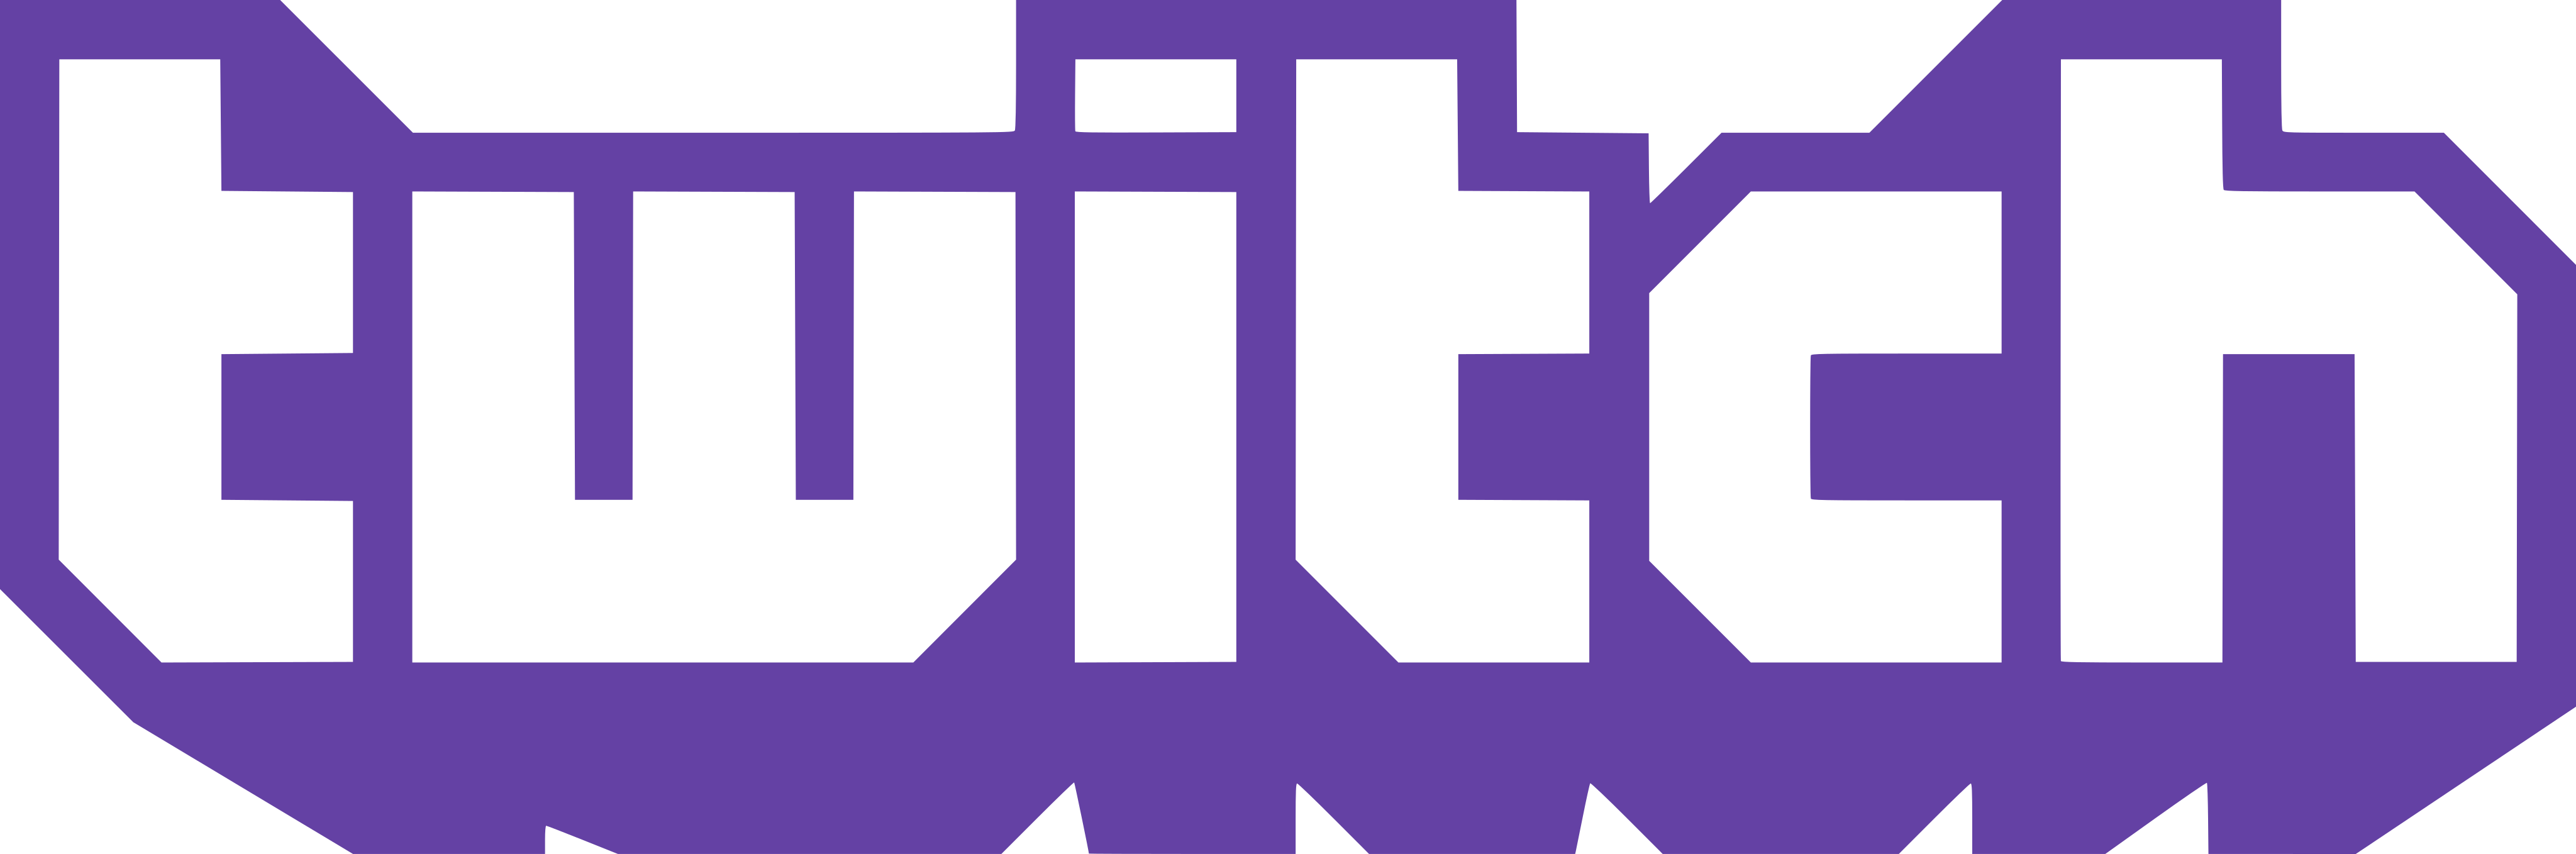 Twitch Logo   Png And Vector   Logo Download - Twitch, Transparent background PNG HD thumbnail